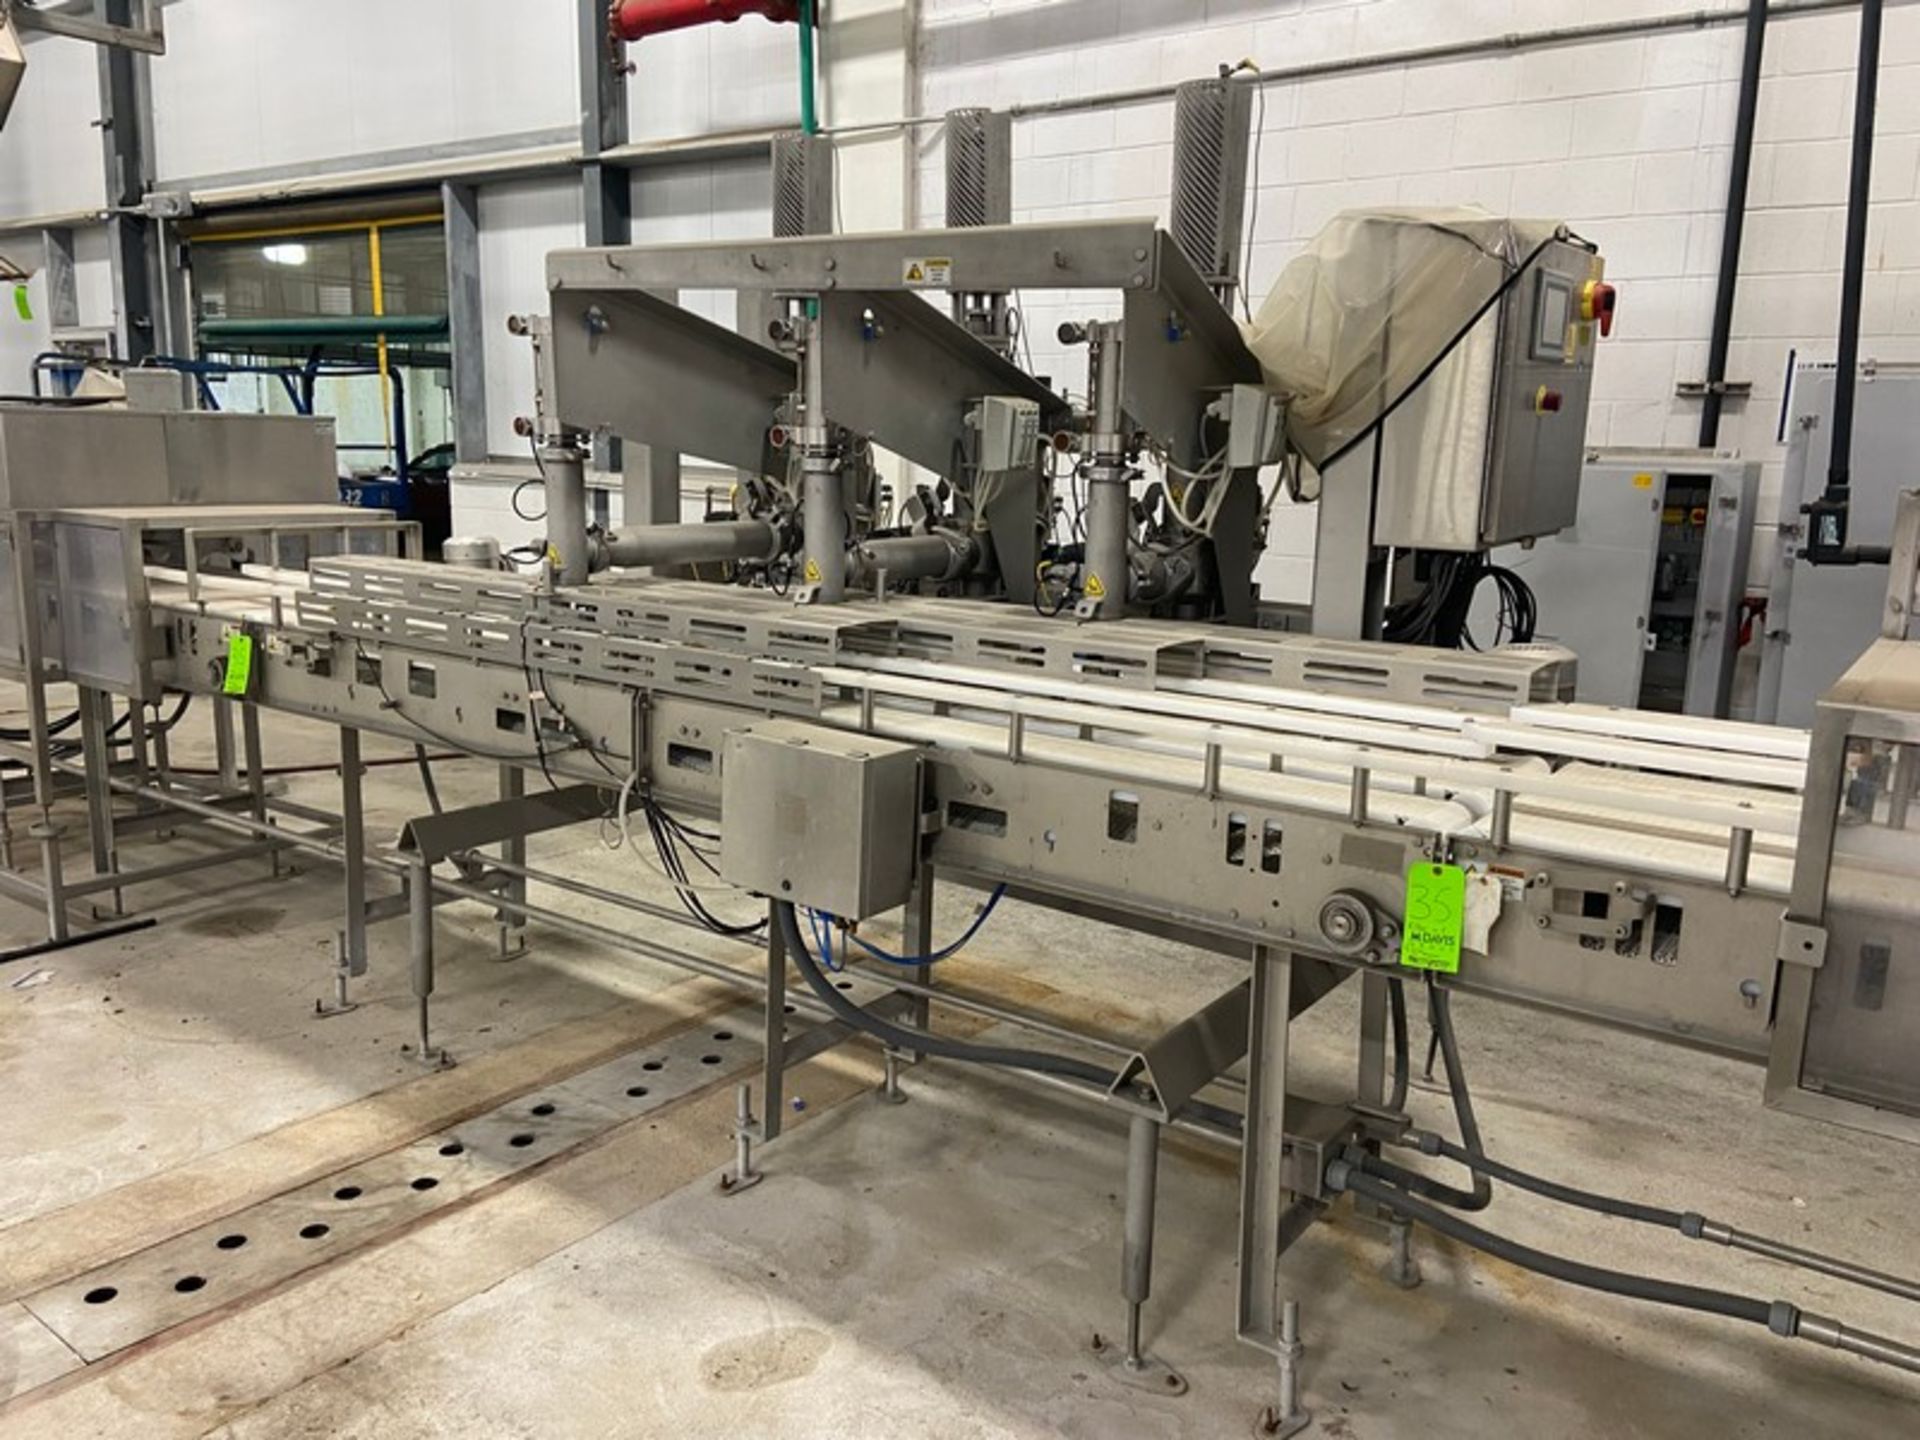 2016 Marlen Can Filler, S/N 6461008-003, with 3-Straight Sections of Conveyor, with Aprox. 6" W